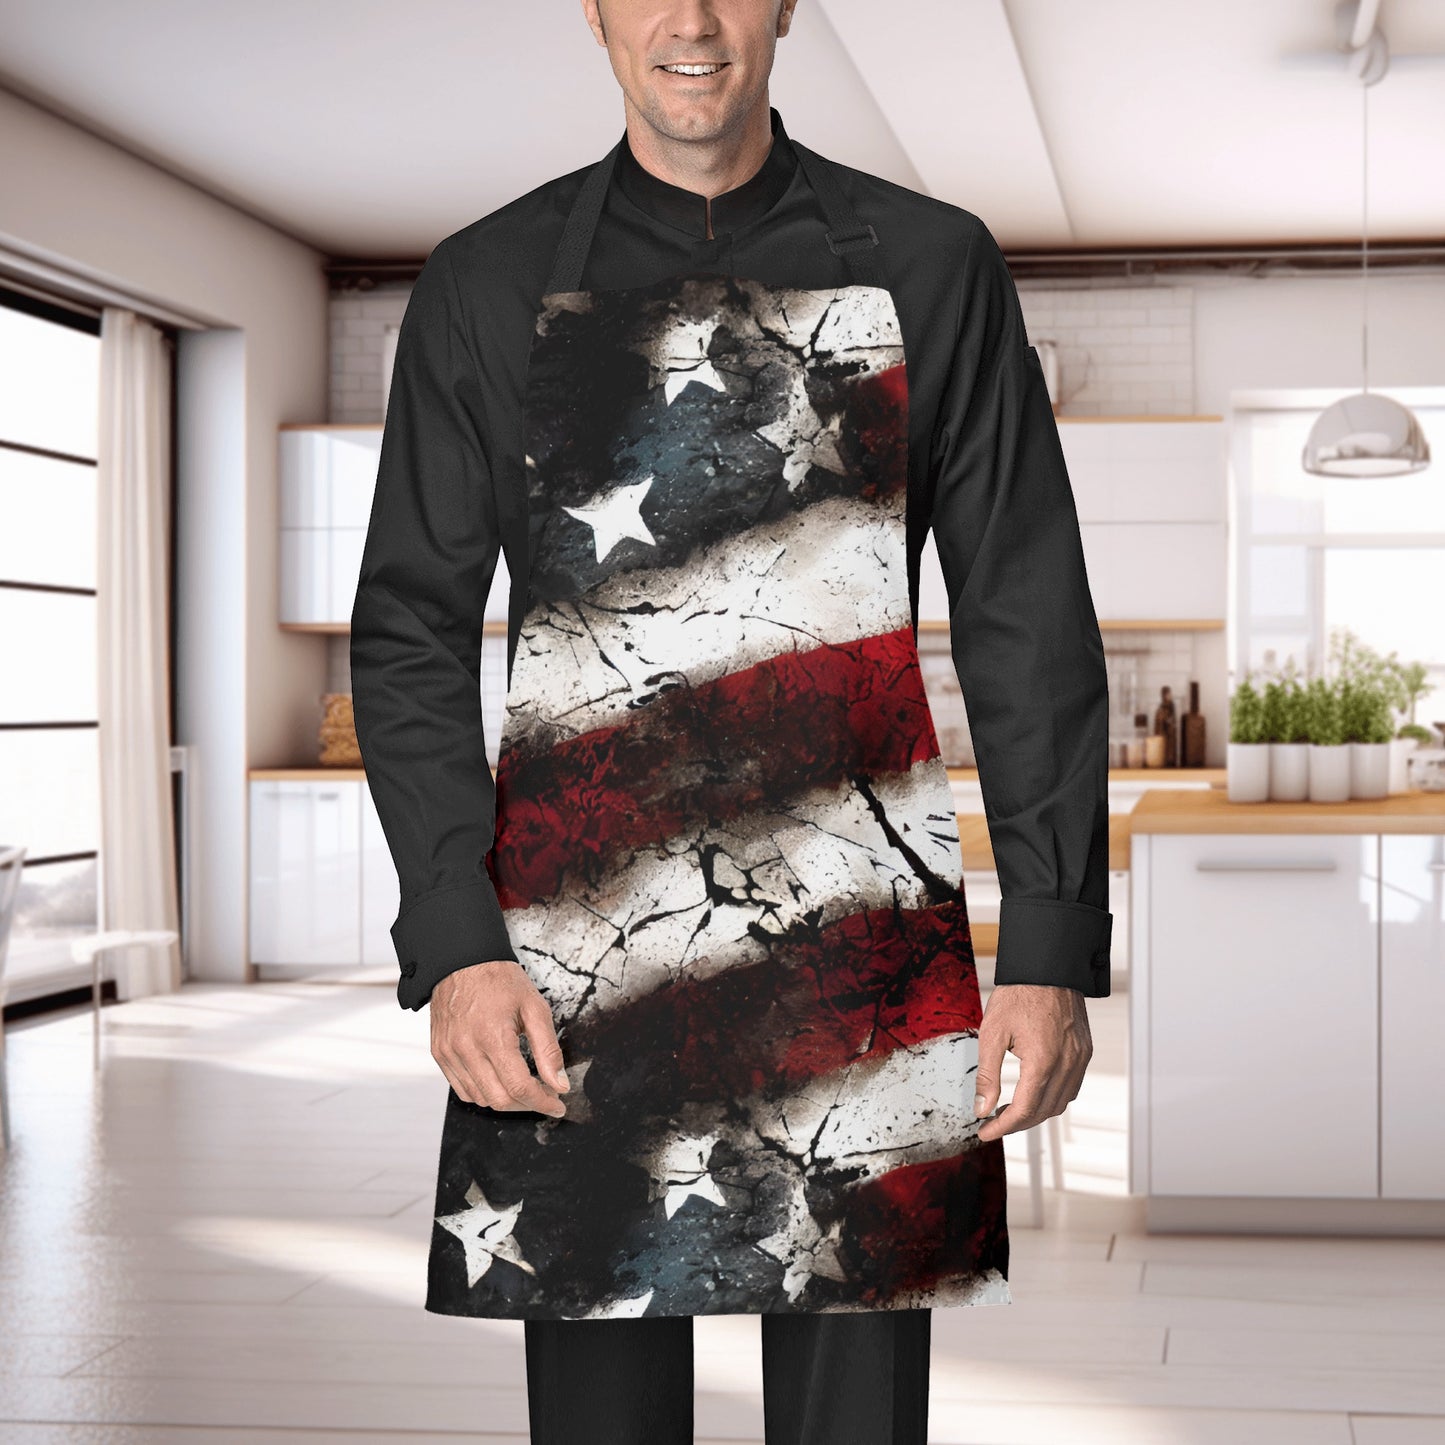 The Red, White And Grunge Apron